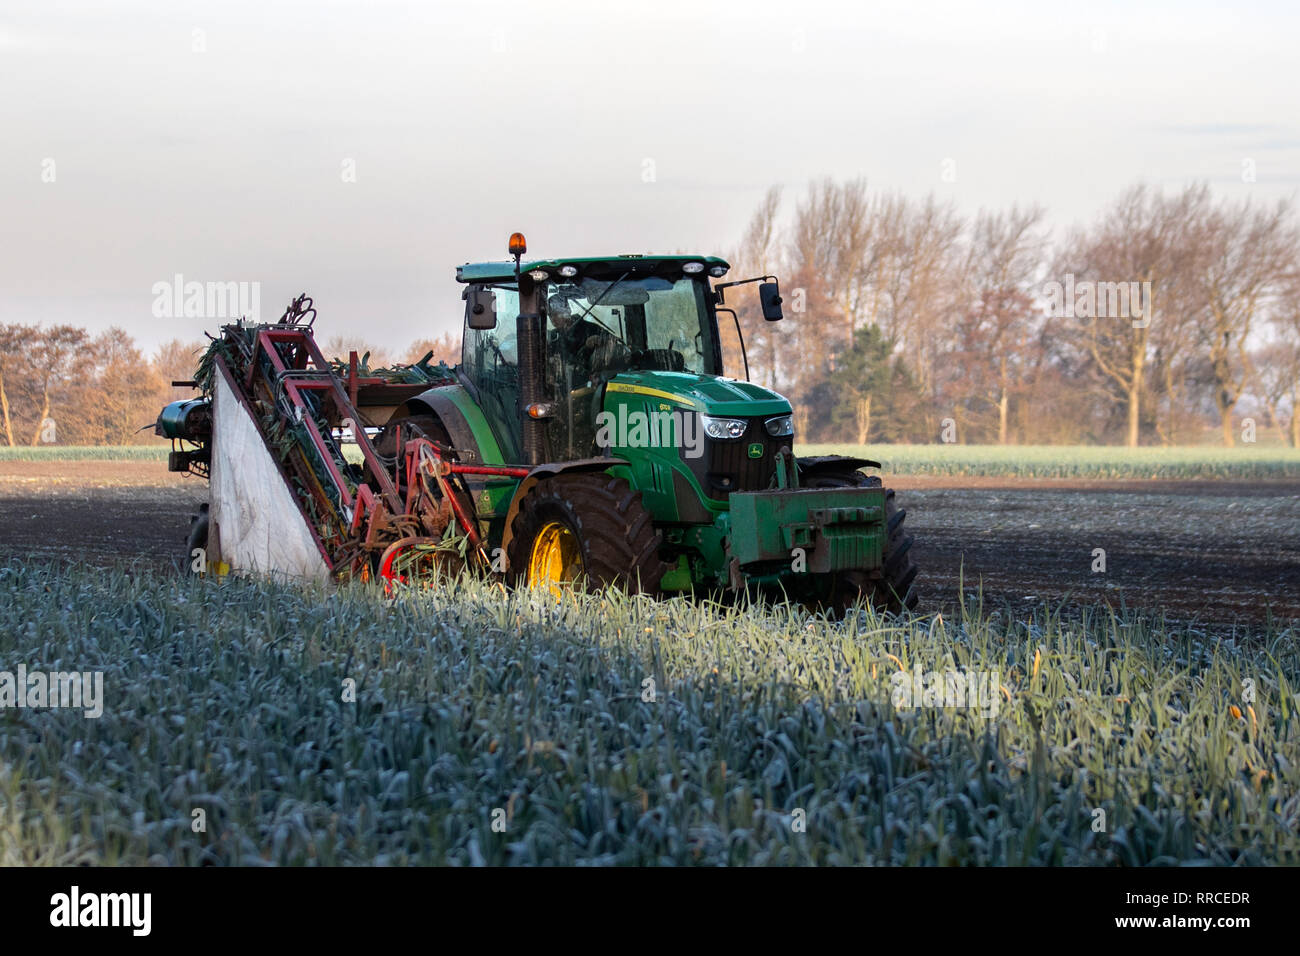 John Deere 6170r working tractor; Harvesting Leeks in dry weather, food, leek, vegetable, green, row, organic, healthy agriculture, fresh, farm, garden, raw plant, nature, natural onion, background, leaf salad, health, group, spring freshness, produce, gardening, harvest ingredient, in Burscough, UK Stock Photo